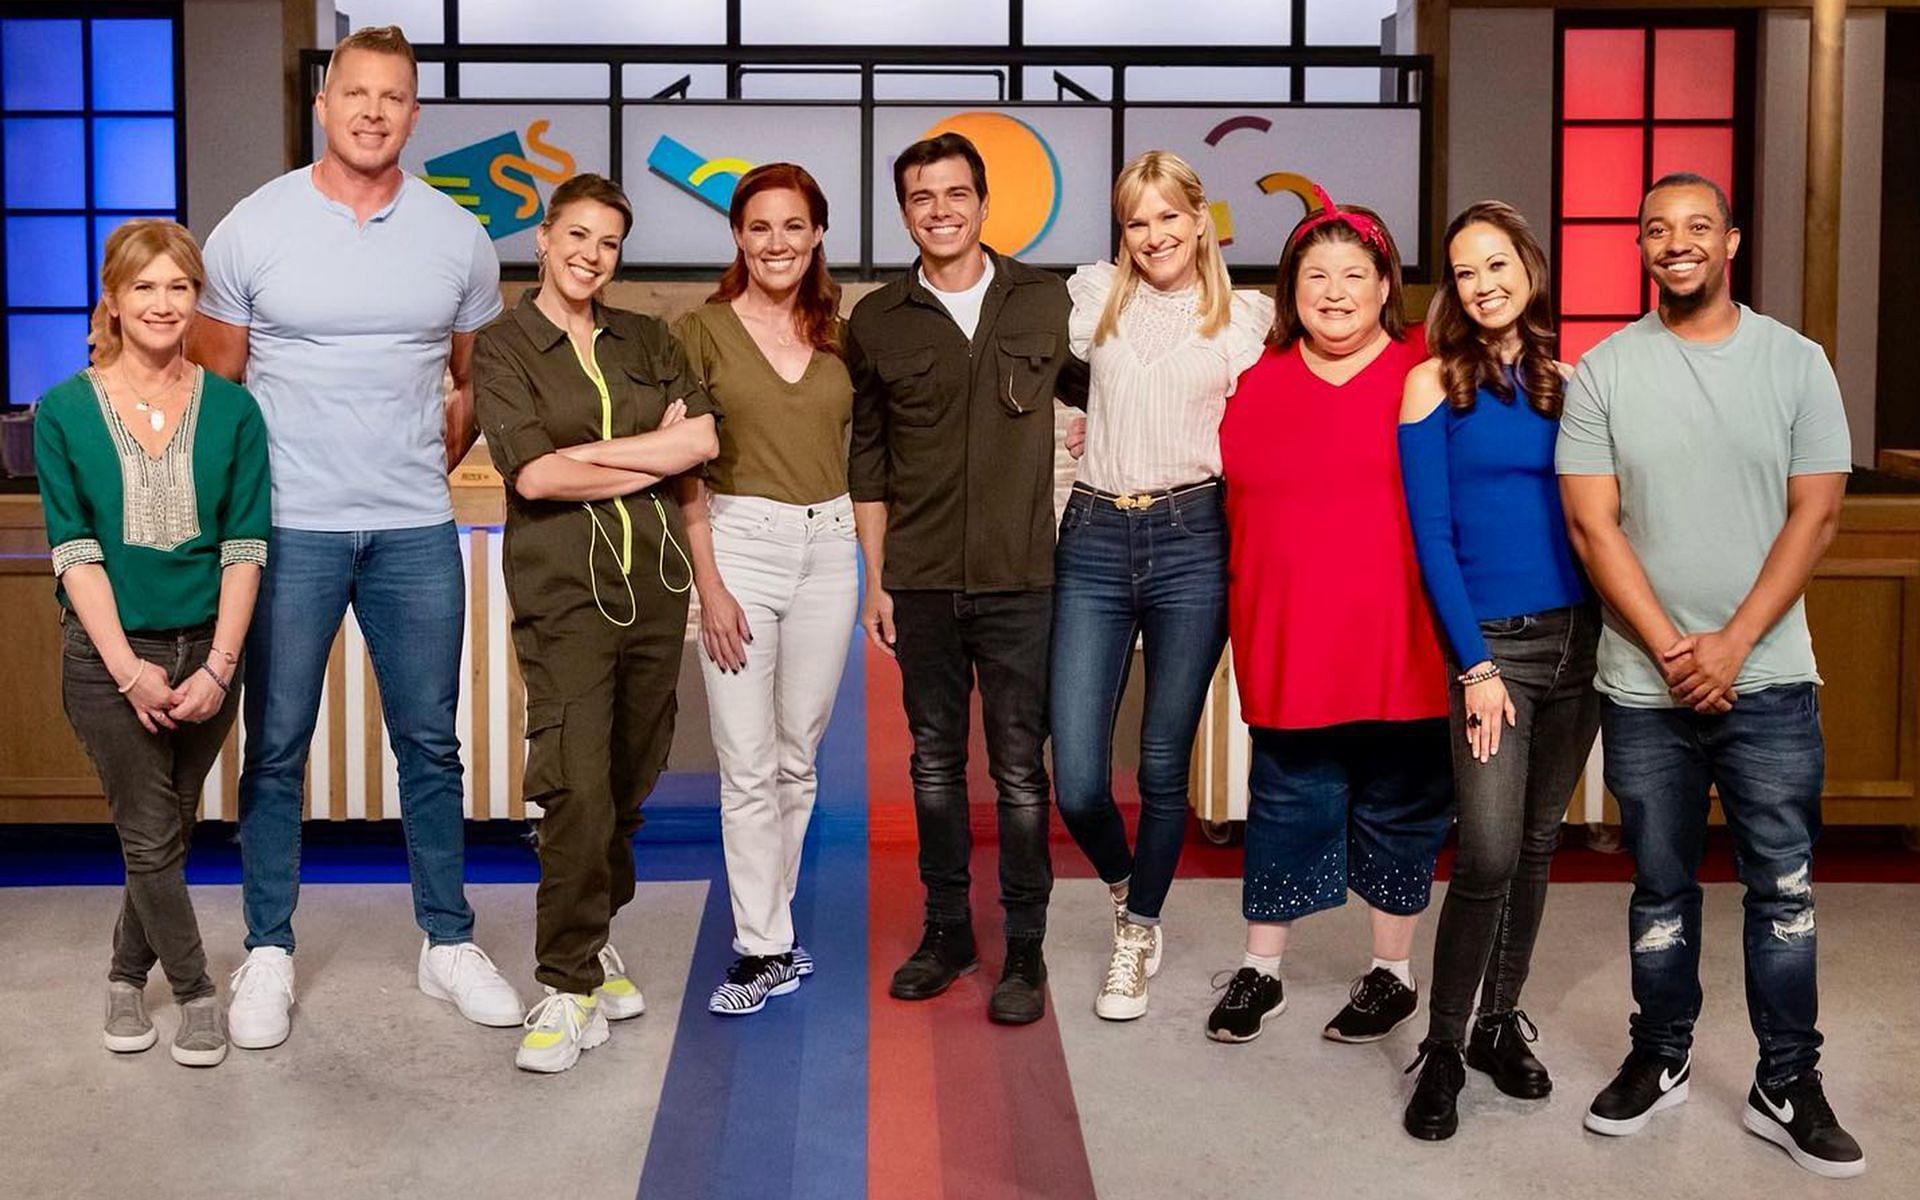 Worst Cooks in America Celebrity Edition: That&rsquo;s so 90&rsquo;s (Image via Food Network)